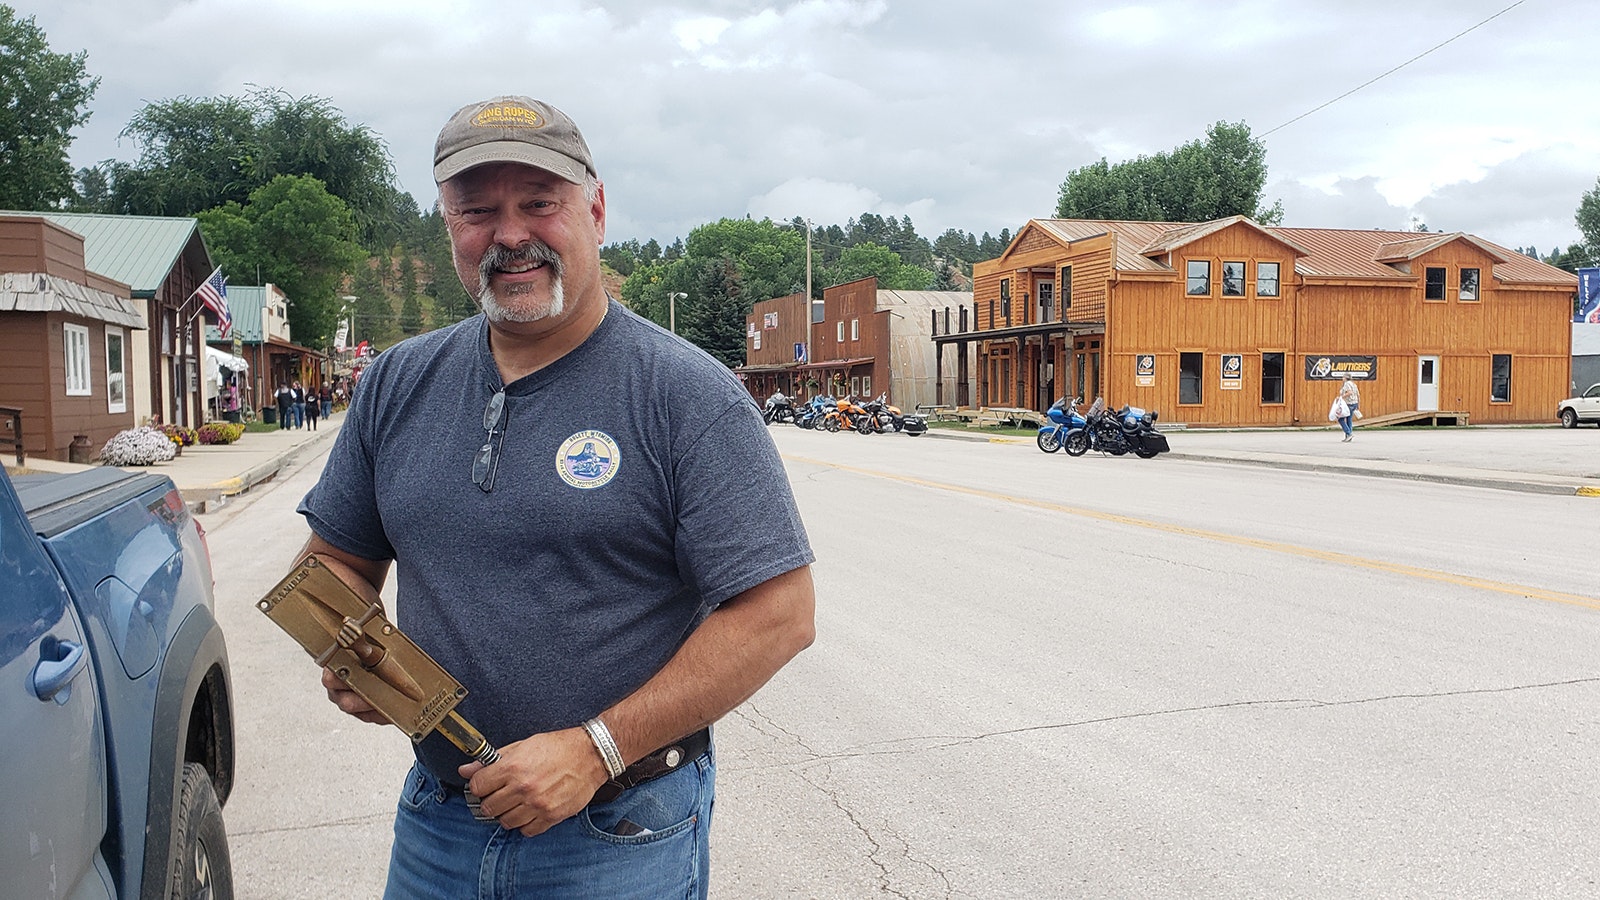 Tom Coronato with a door pull he found in the UK for his new building on Hulett's Main Street, in the background. It's the first new building on Hulett's Main Street in 40 years.